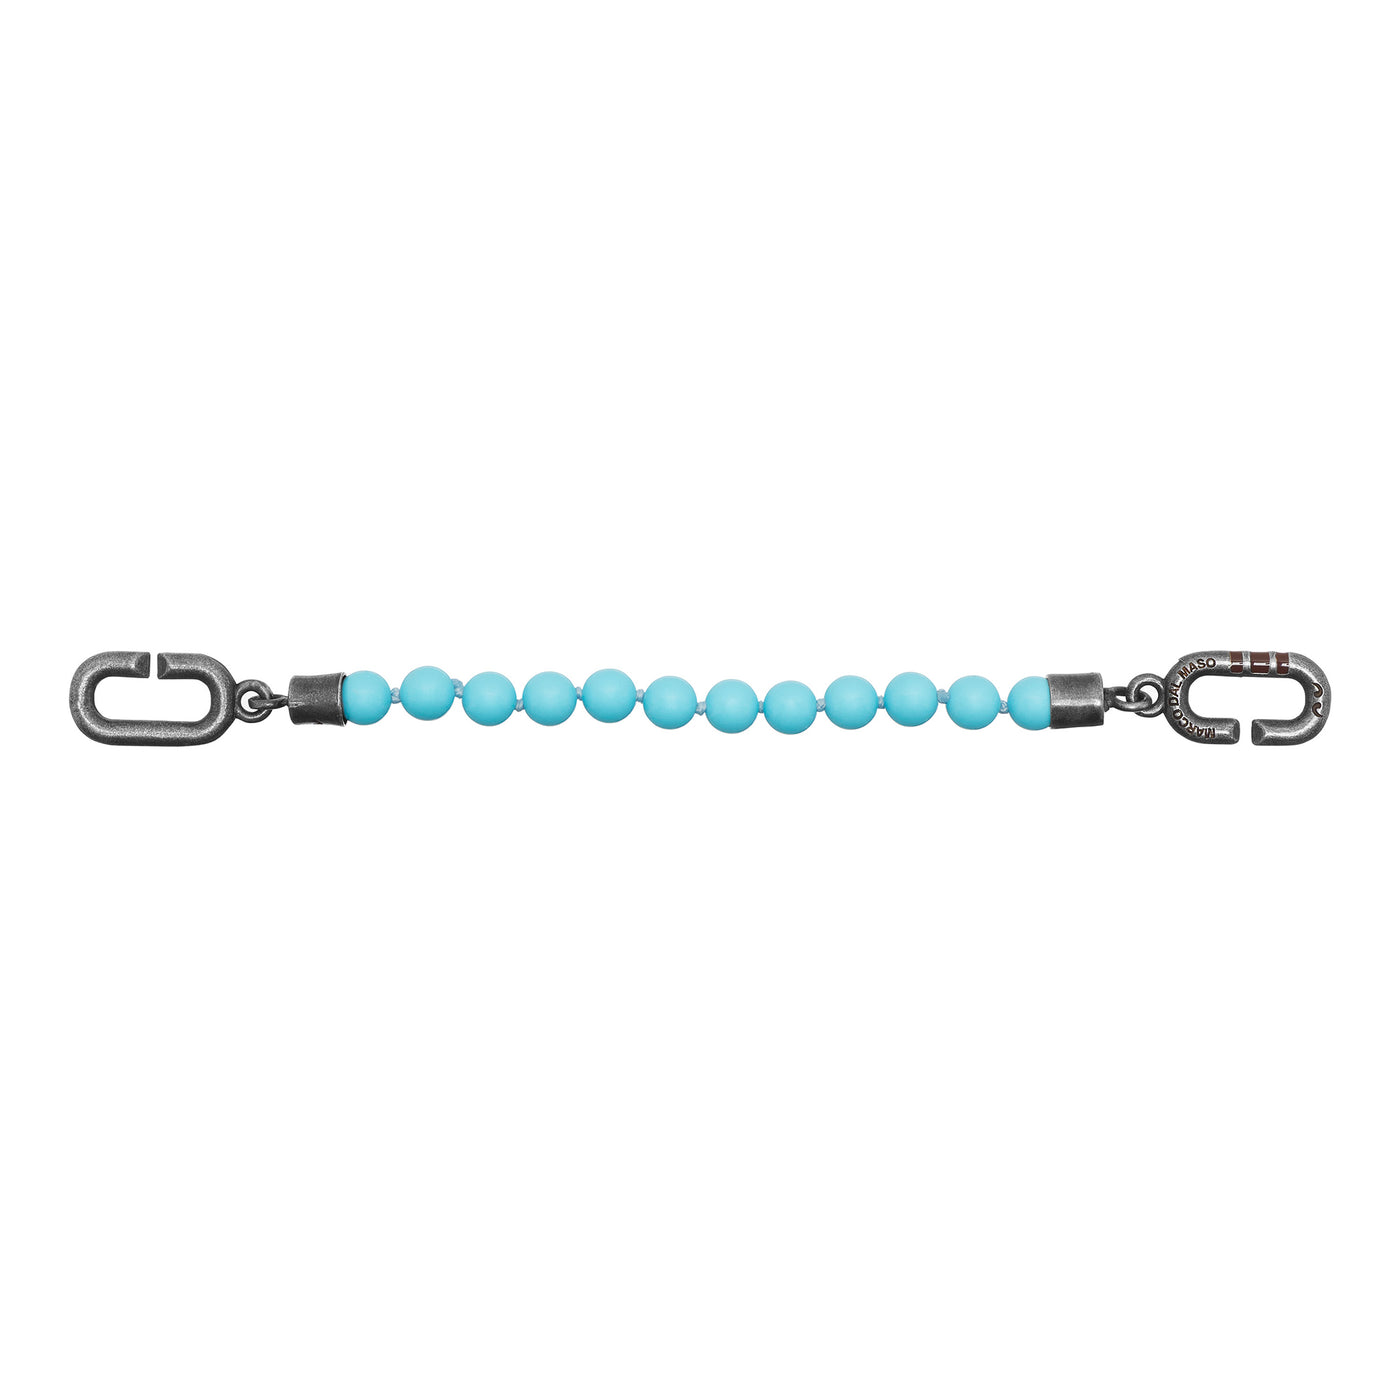 THE LINK Turquoise Extension Beads